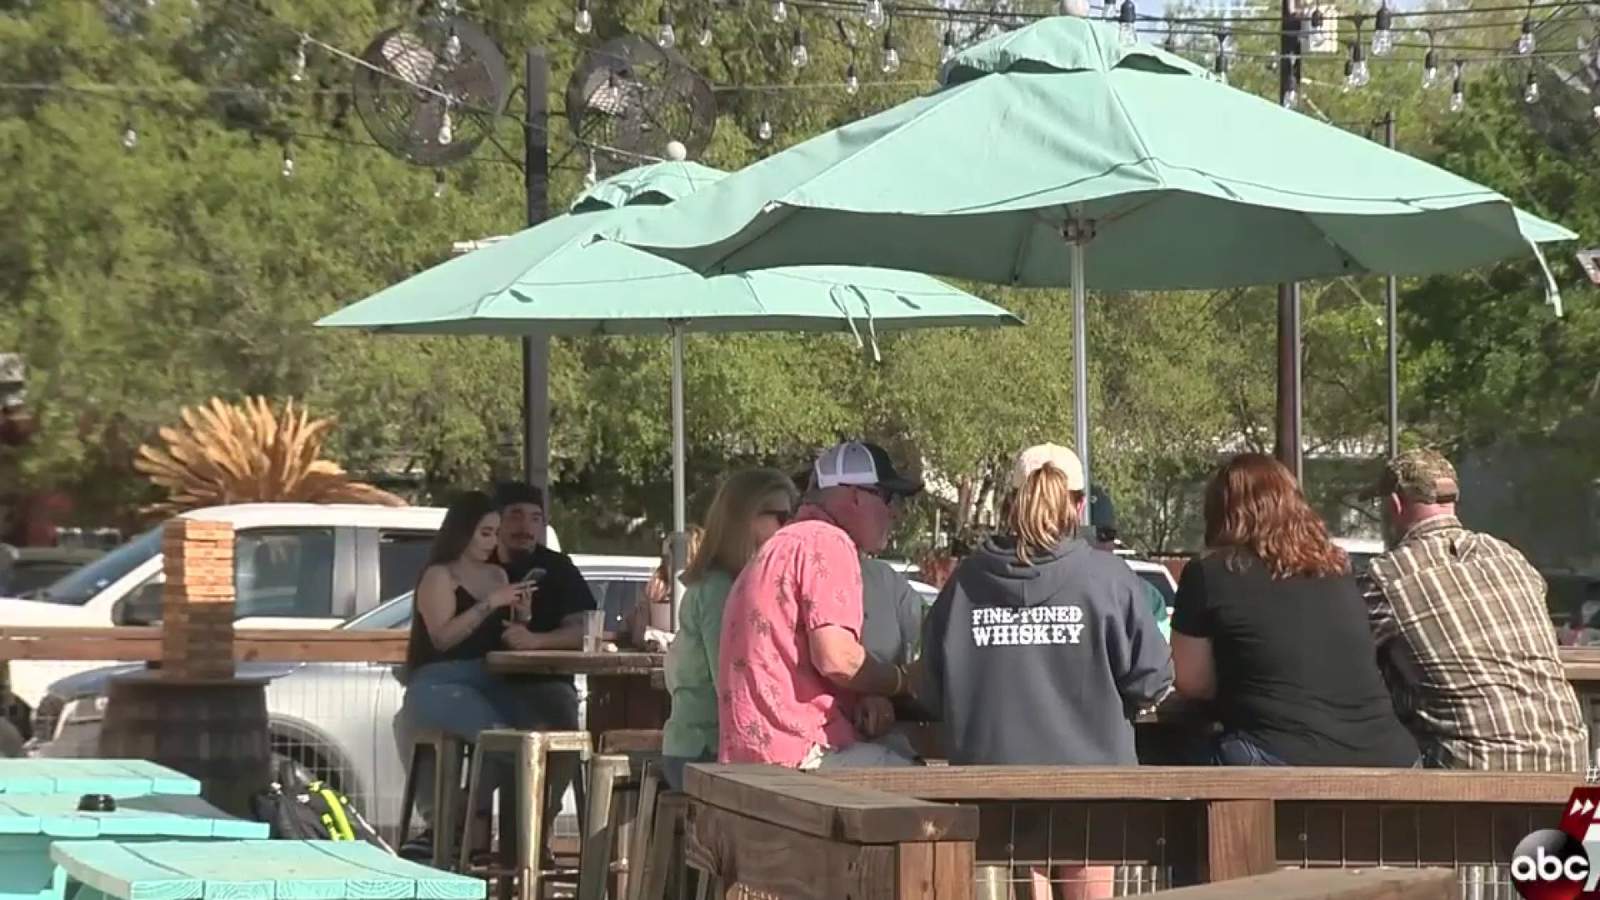 ‘High demand and low supply in the workforce’: San Antonio business owners struggle to find employees to operate at 100%